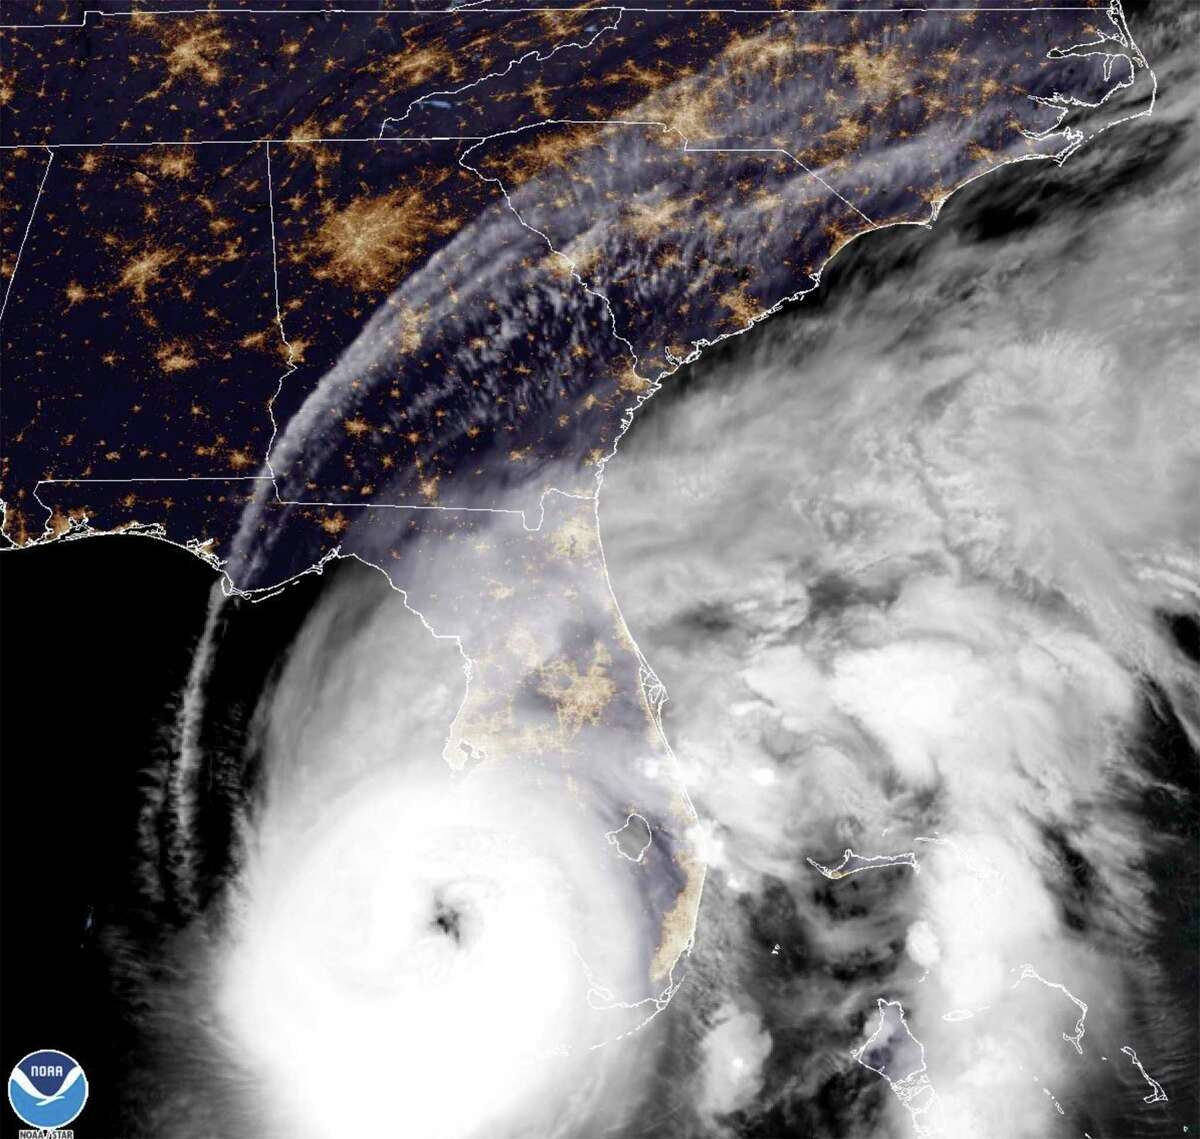 This satellite image provided by NOAA shows Hurricane Ian off Florida's southwest coast Wednesday, Sept. 28, 2022. The U.S. National Hurricane Center says Ian has rapidly intensified off Florida's coast, gaining top winds of 155 mph, just shy of the most devastating Category 5 hurricane status. (NOAA via AP)